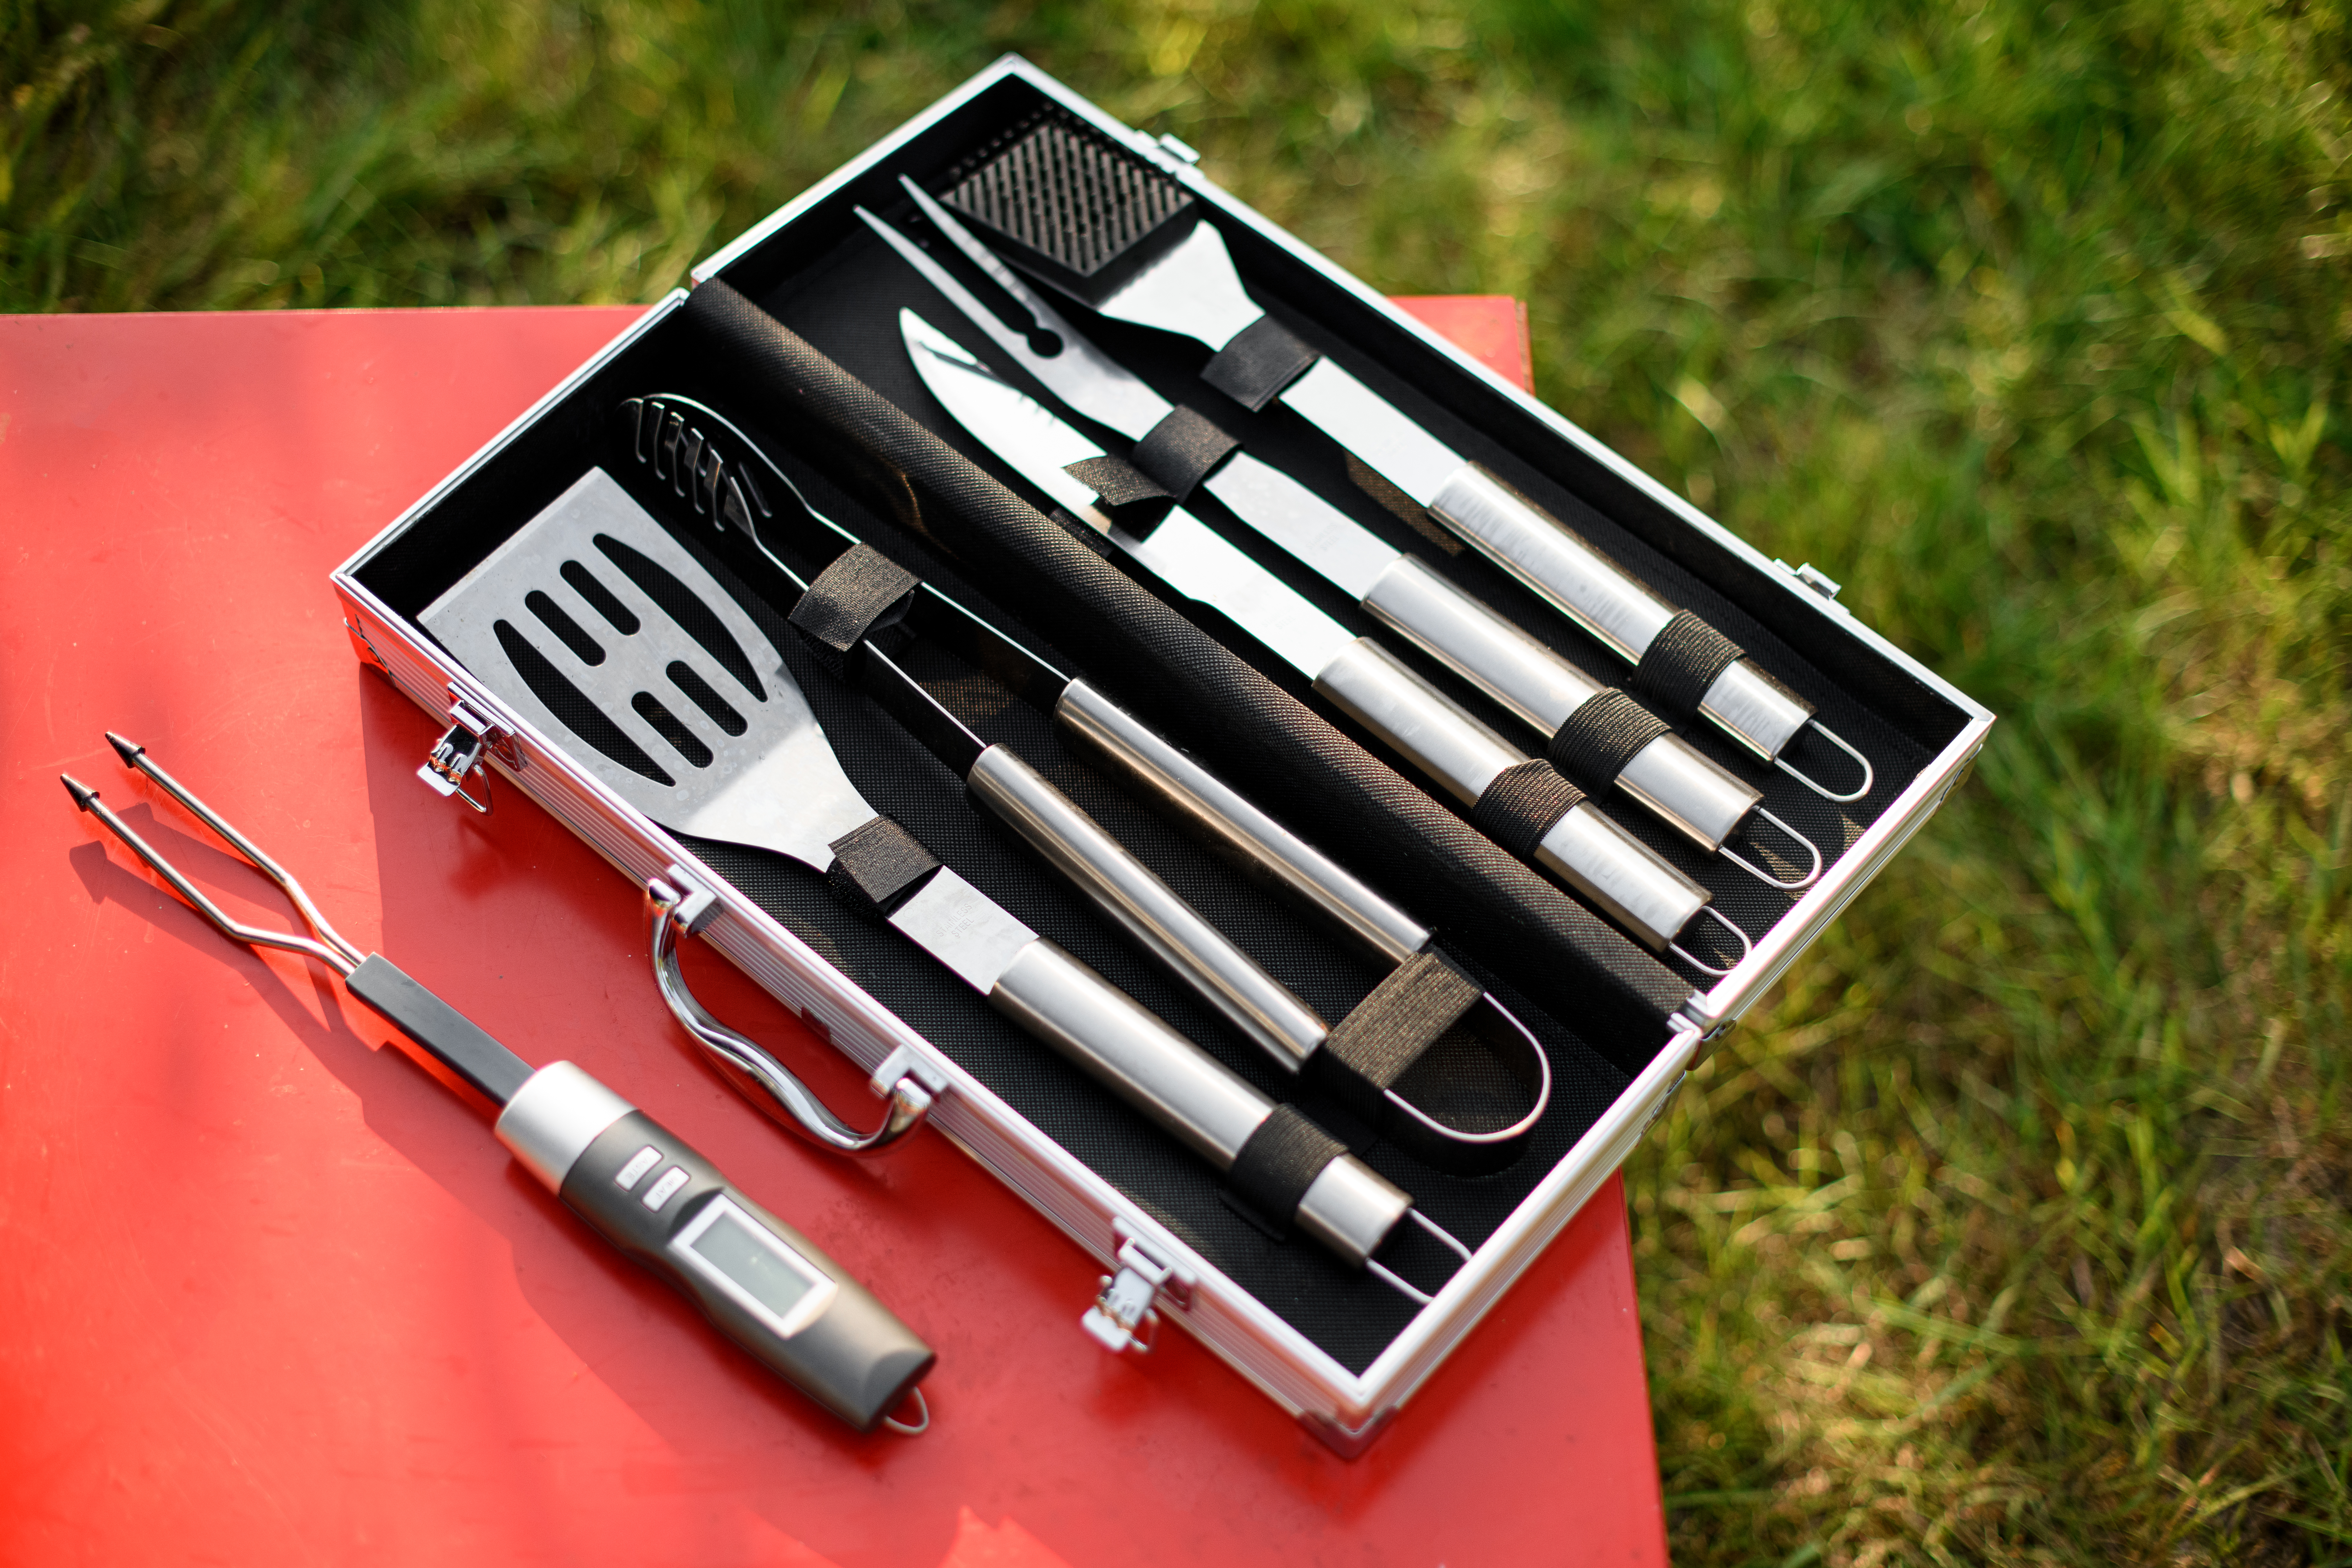 Top view on set of BBQ tools. Barbecue steel instruments kit - tongs, spatula, fork. Close-up